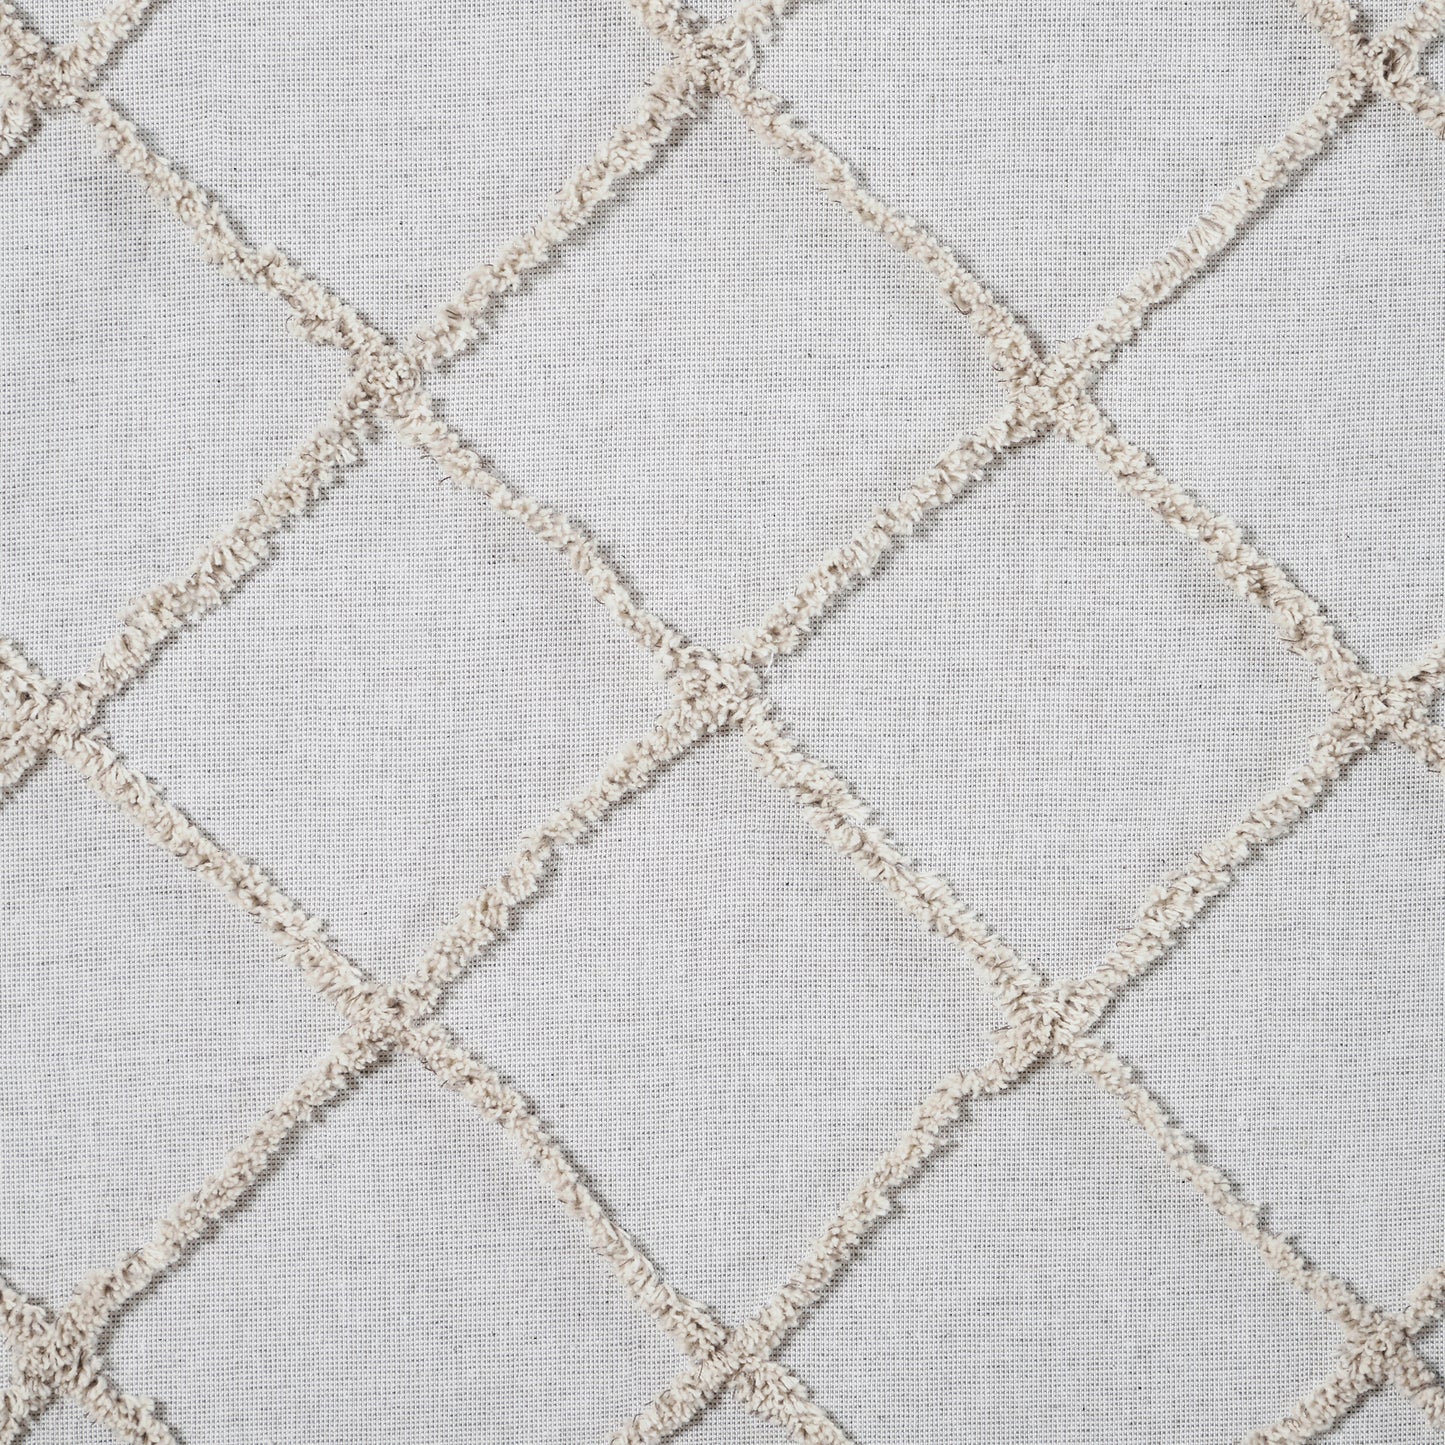 80521-Frayed-Lattice-Oatmeal-Pillow-Cover-20x20-image-4